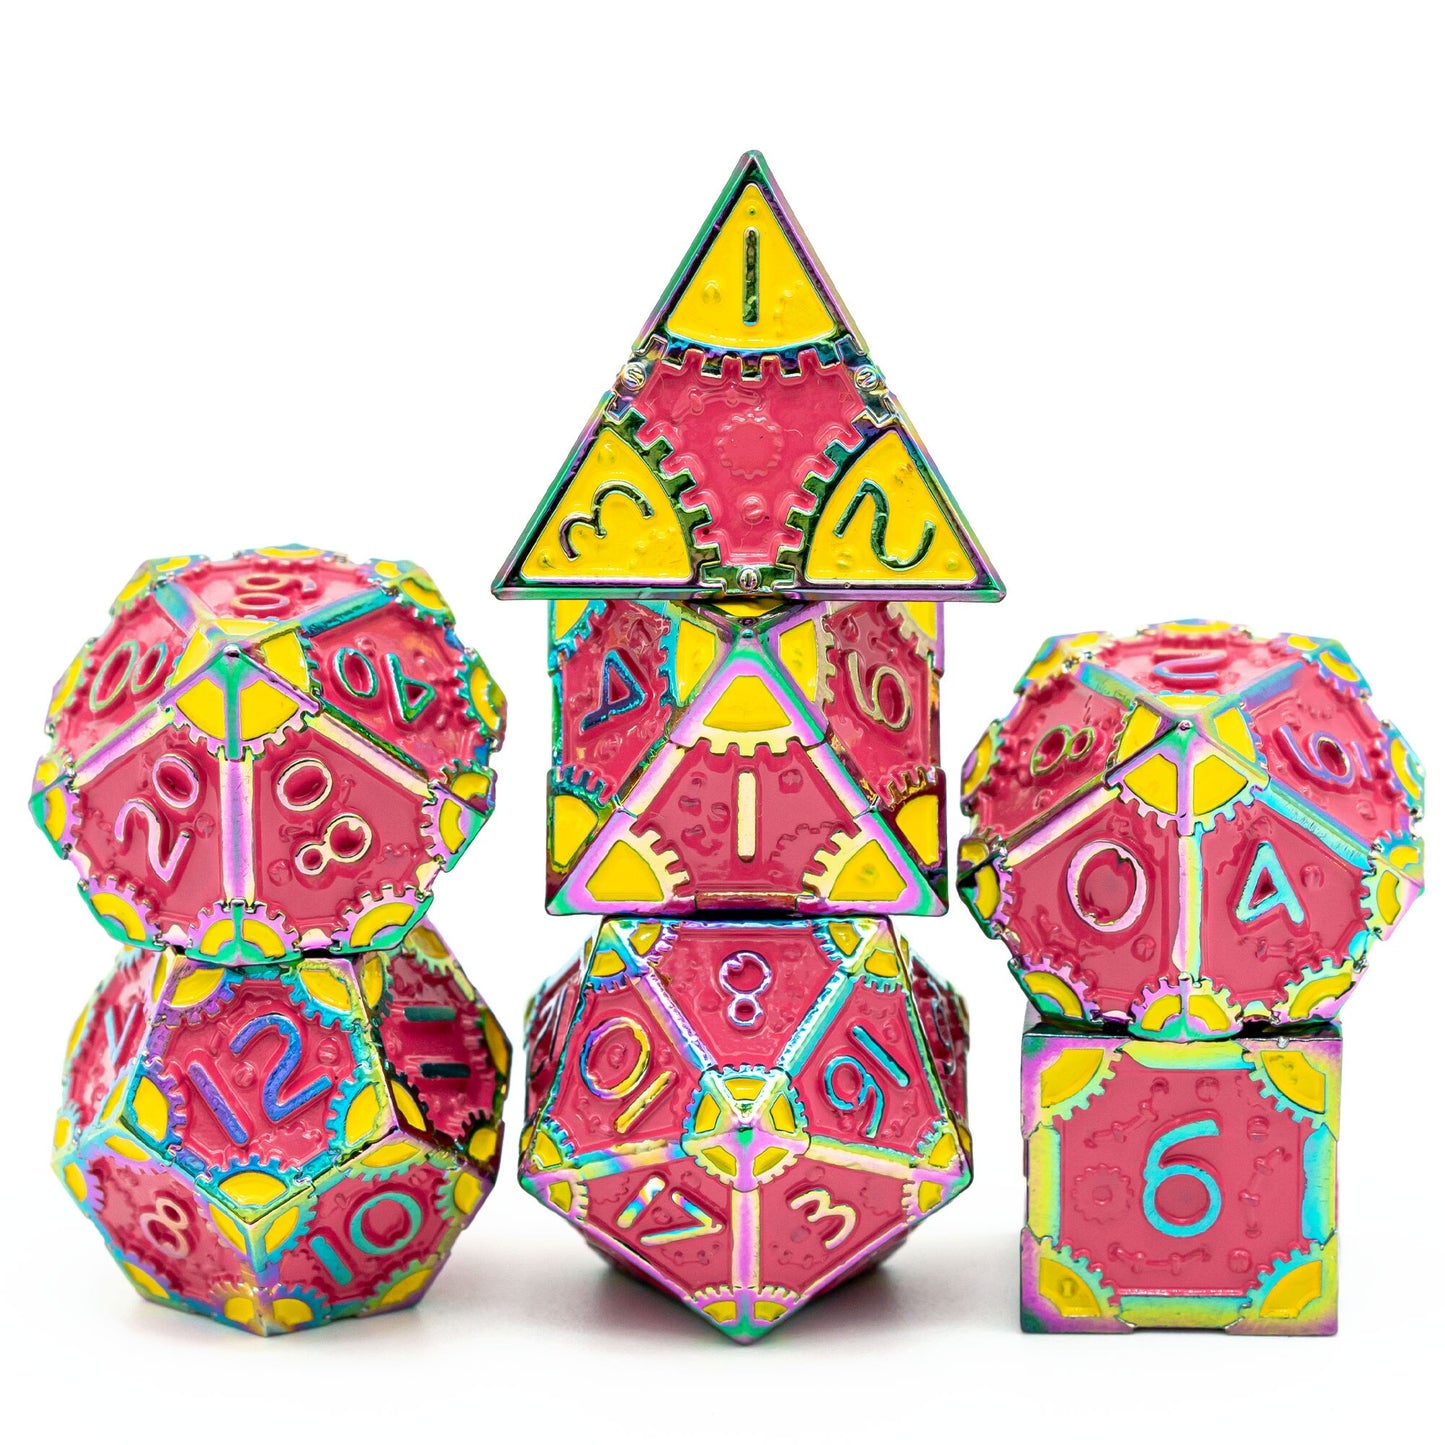 Pink and yellow steampunk dice